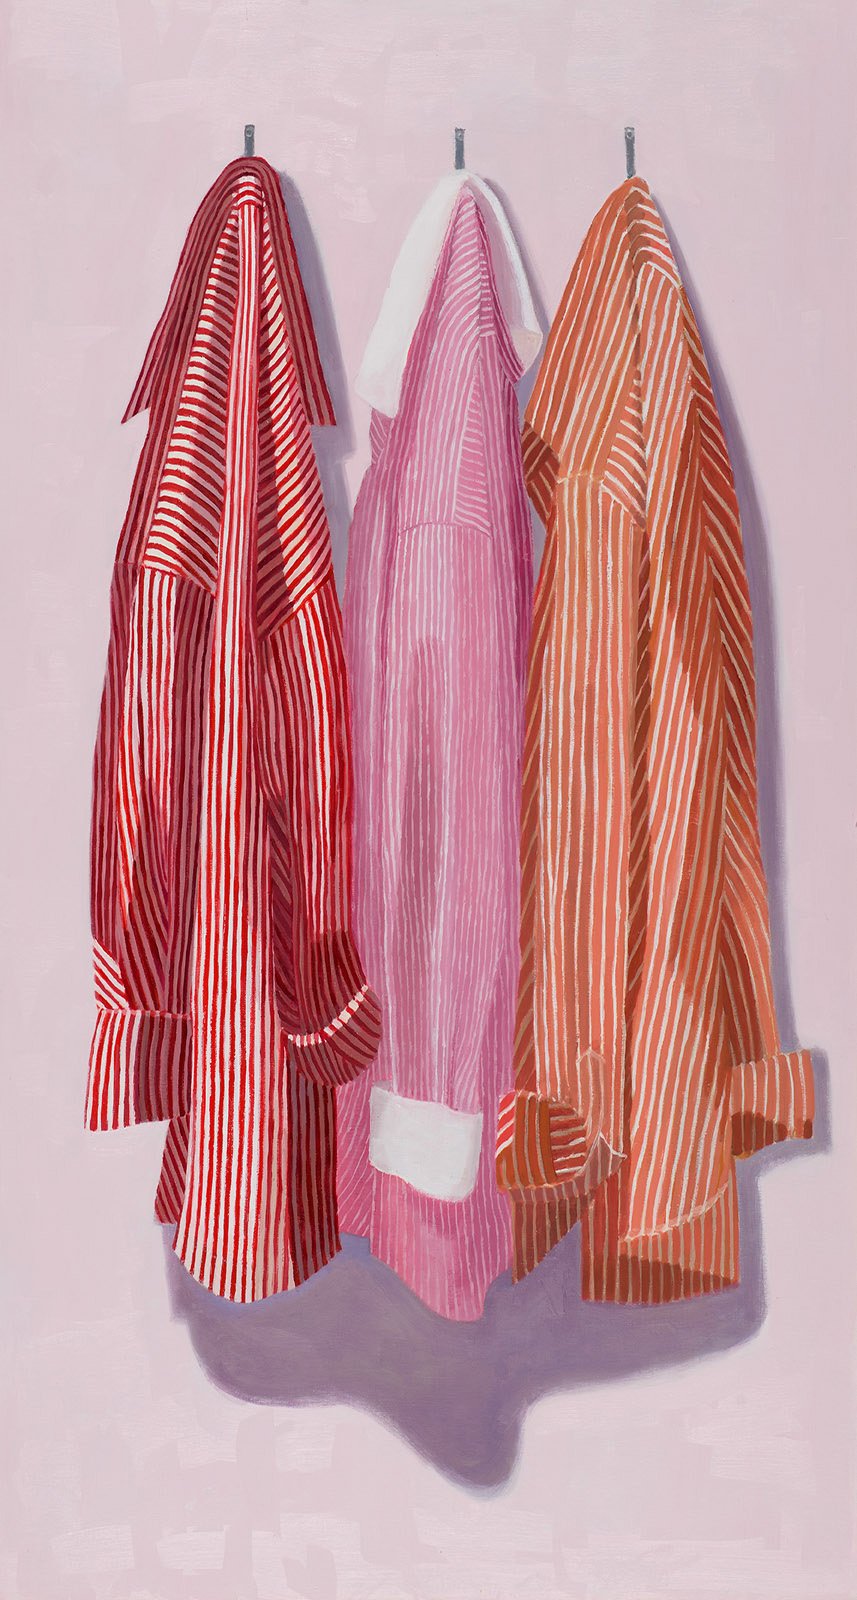 Stripes &  Solids 3 by Carla Roth